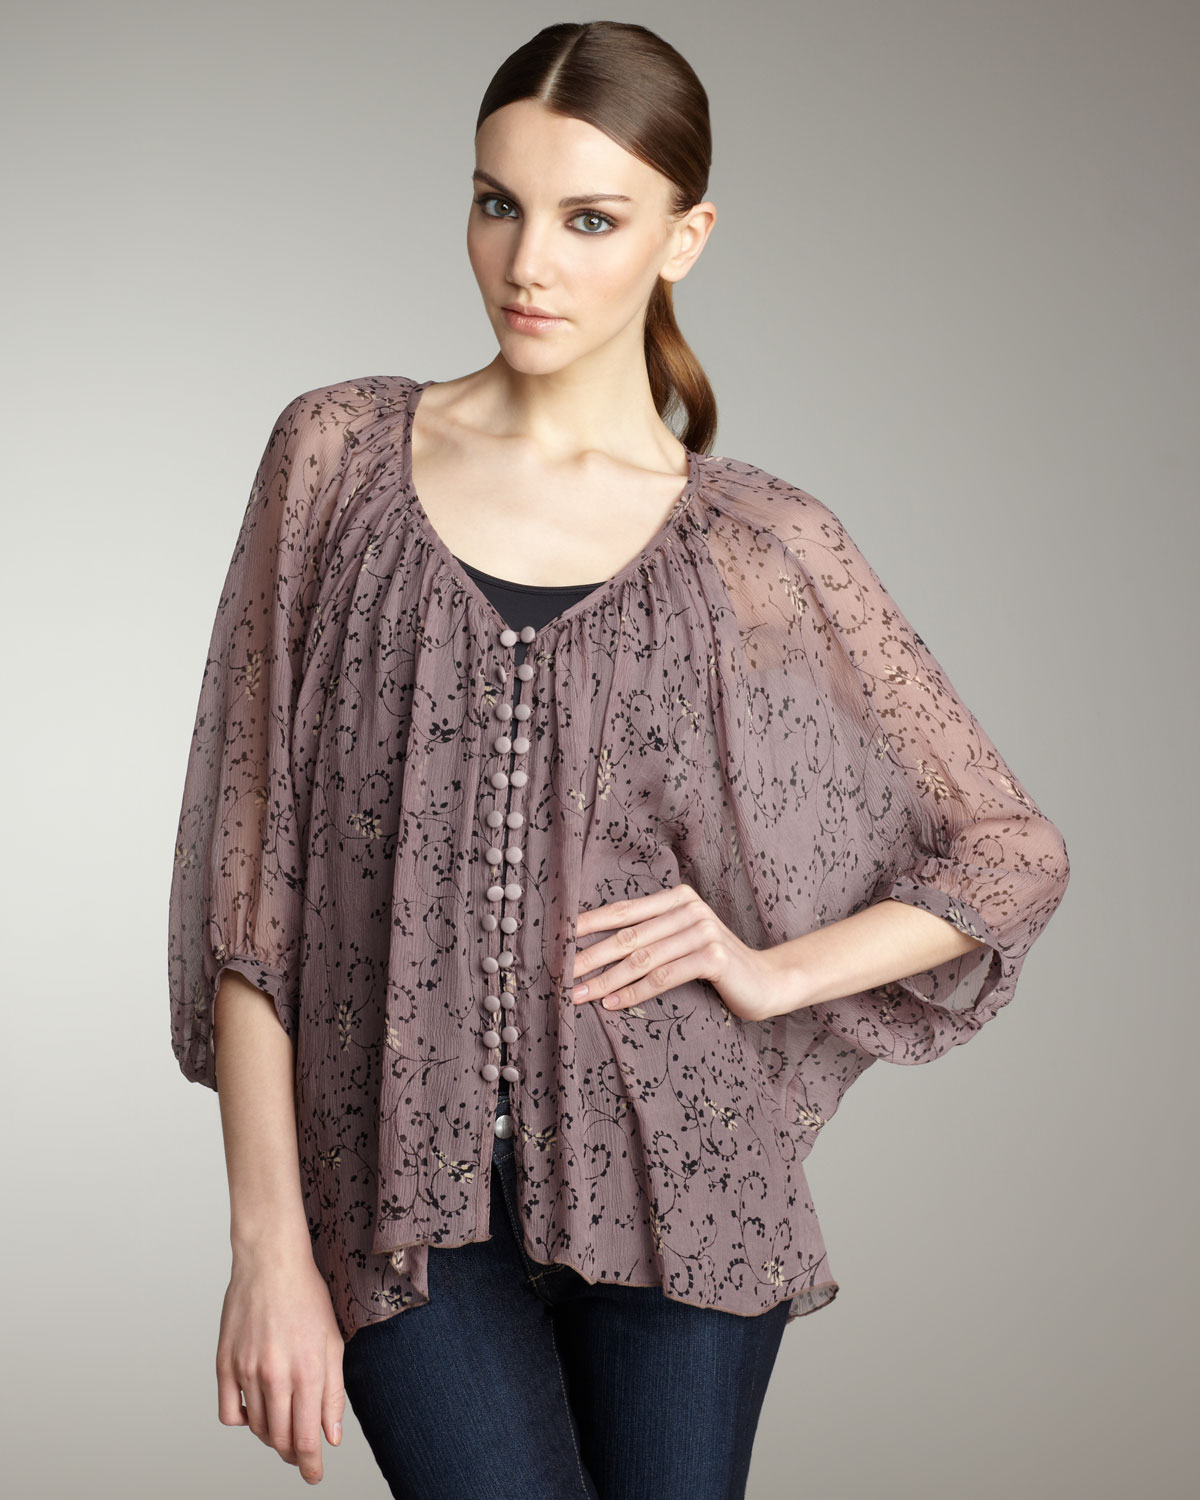 Winter Kate Tiger Lily Blouse in Plum/black in Purple (plum) | Lyst